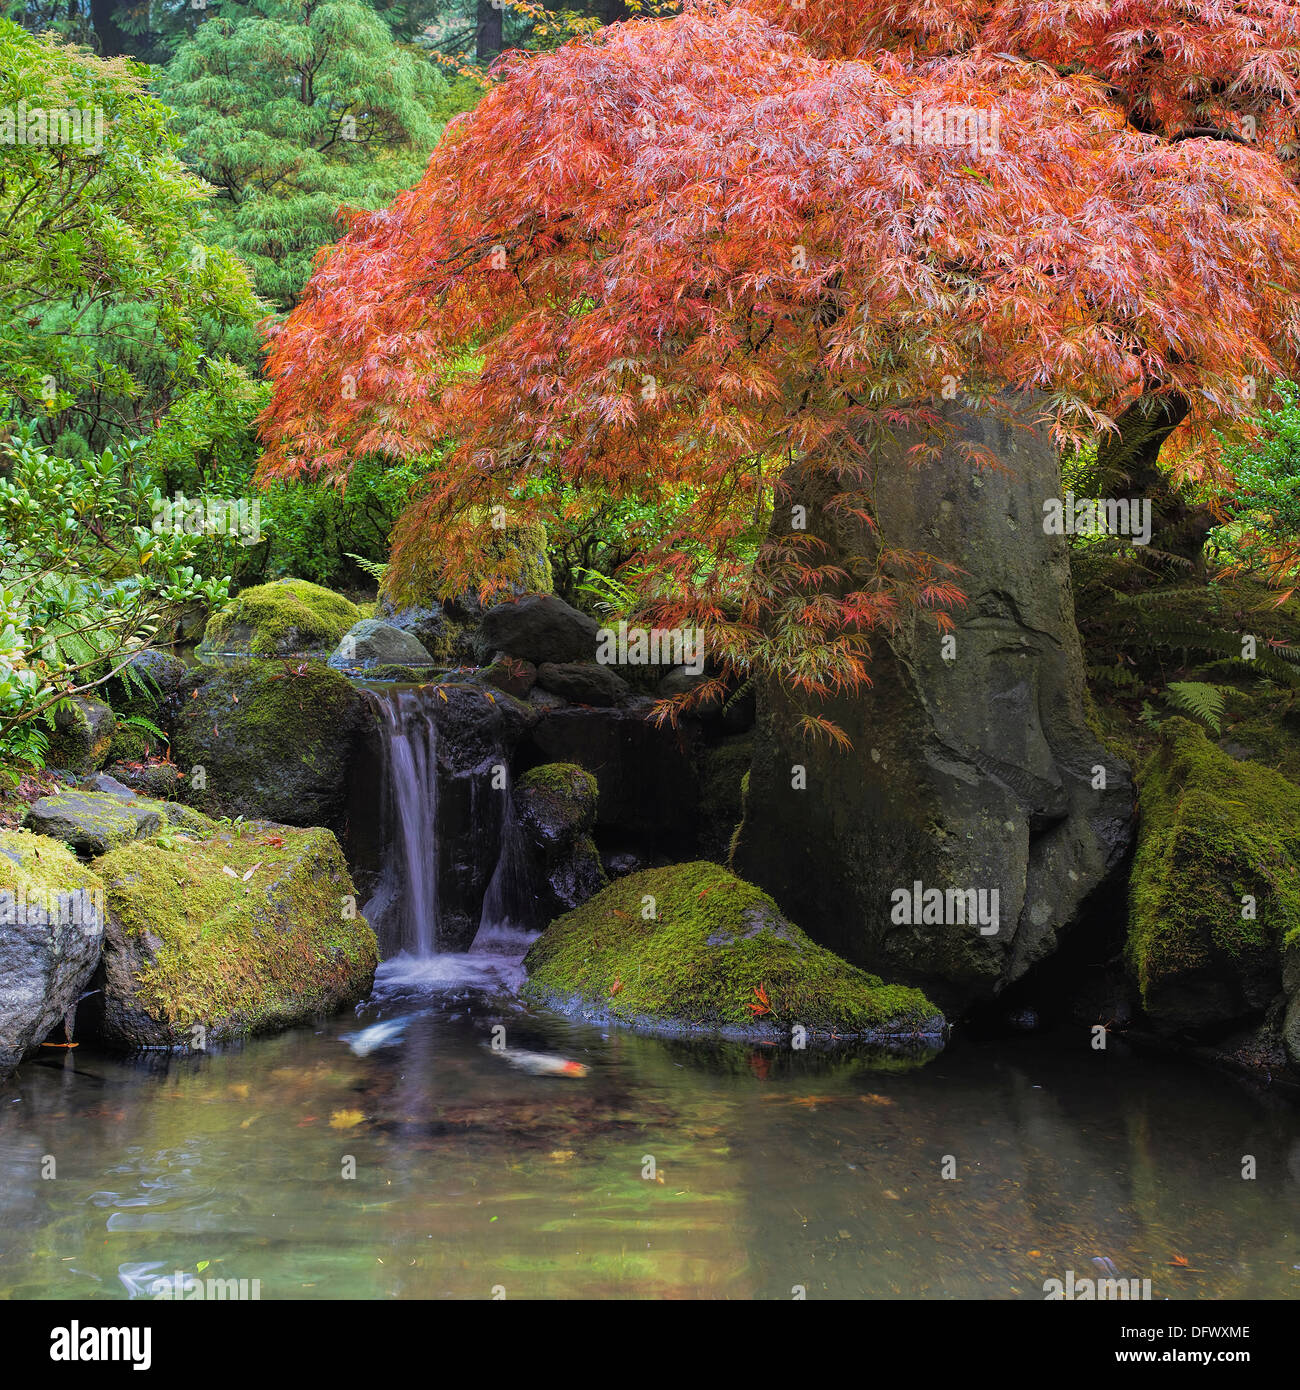 Red Japanese Laceleaf Maple Tree Over Waterfall Pond with Koi Fish Stock  Photo - Alamy